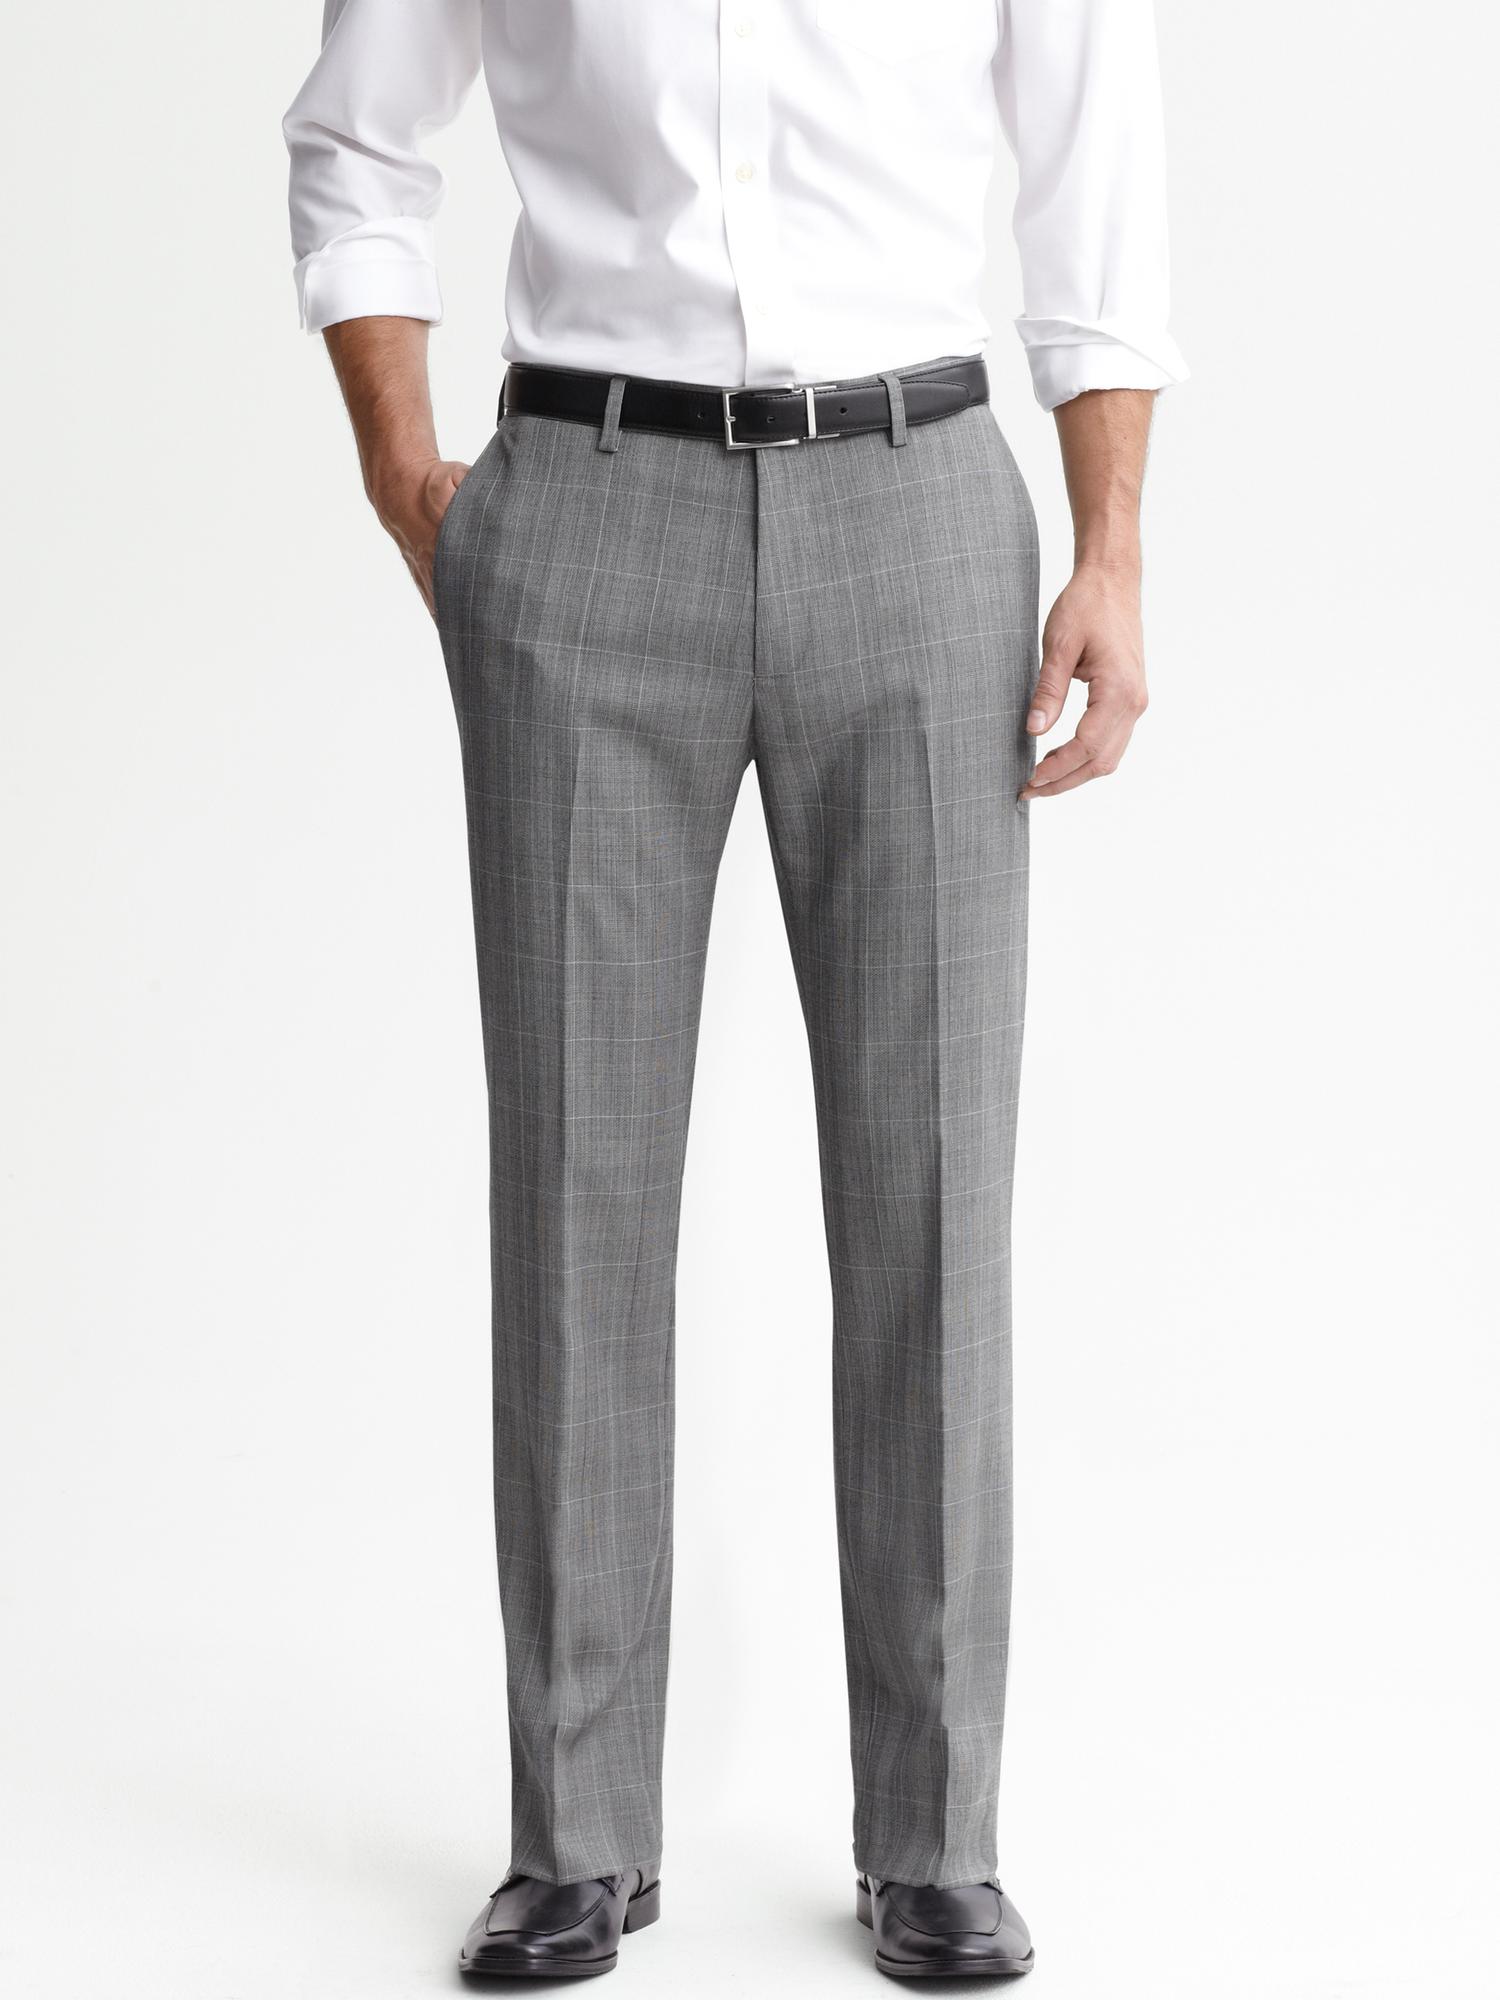 Tailored slim charcoal wool trouser